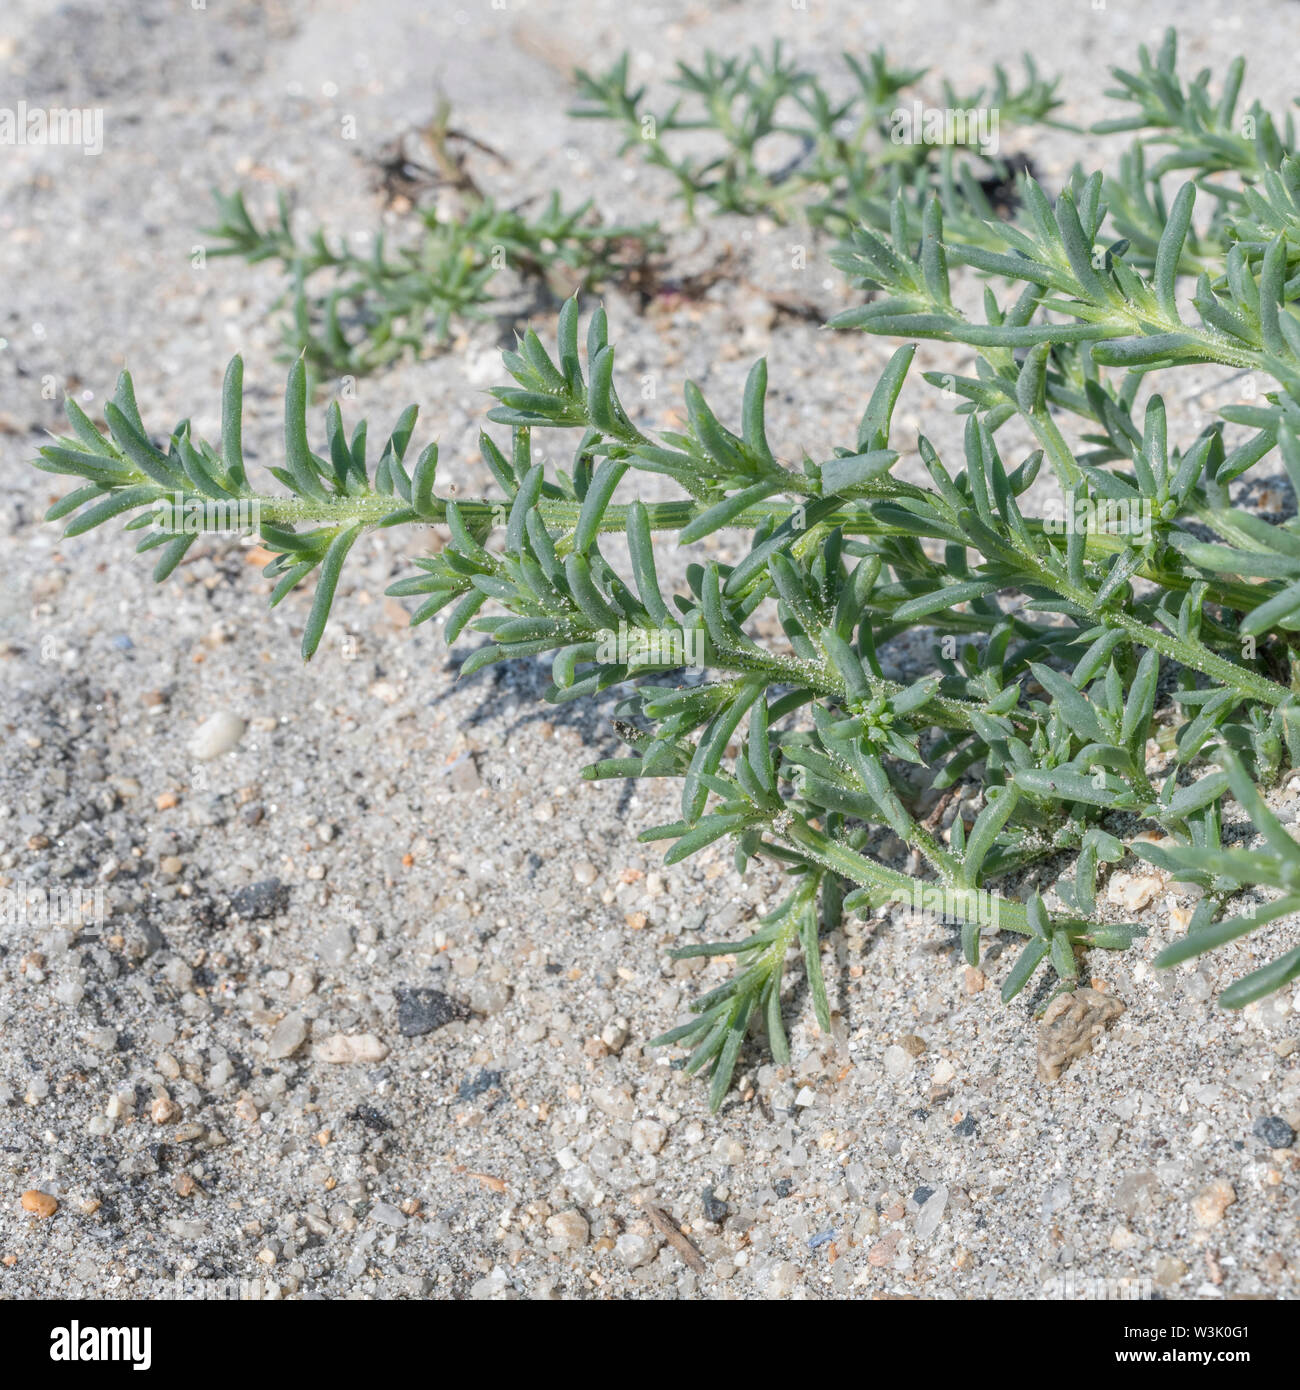 Mid-summer foliage /  leaves of Prickly Saltwort / Salsola kali on a sandy beach. Once used as a source of soda in glass-making. Stock Photo